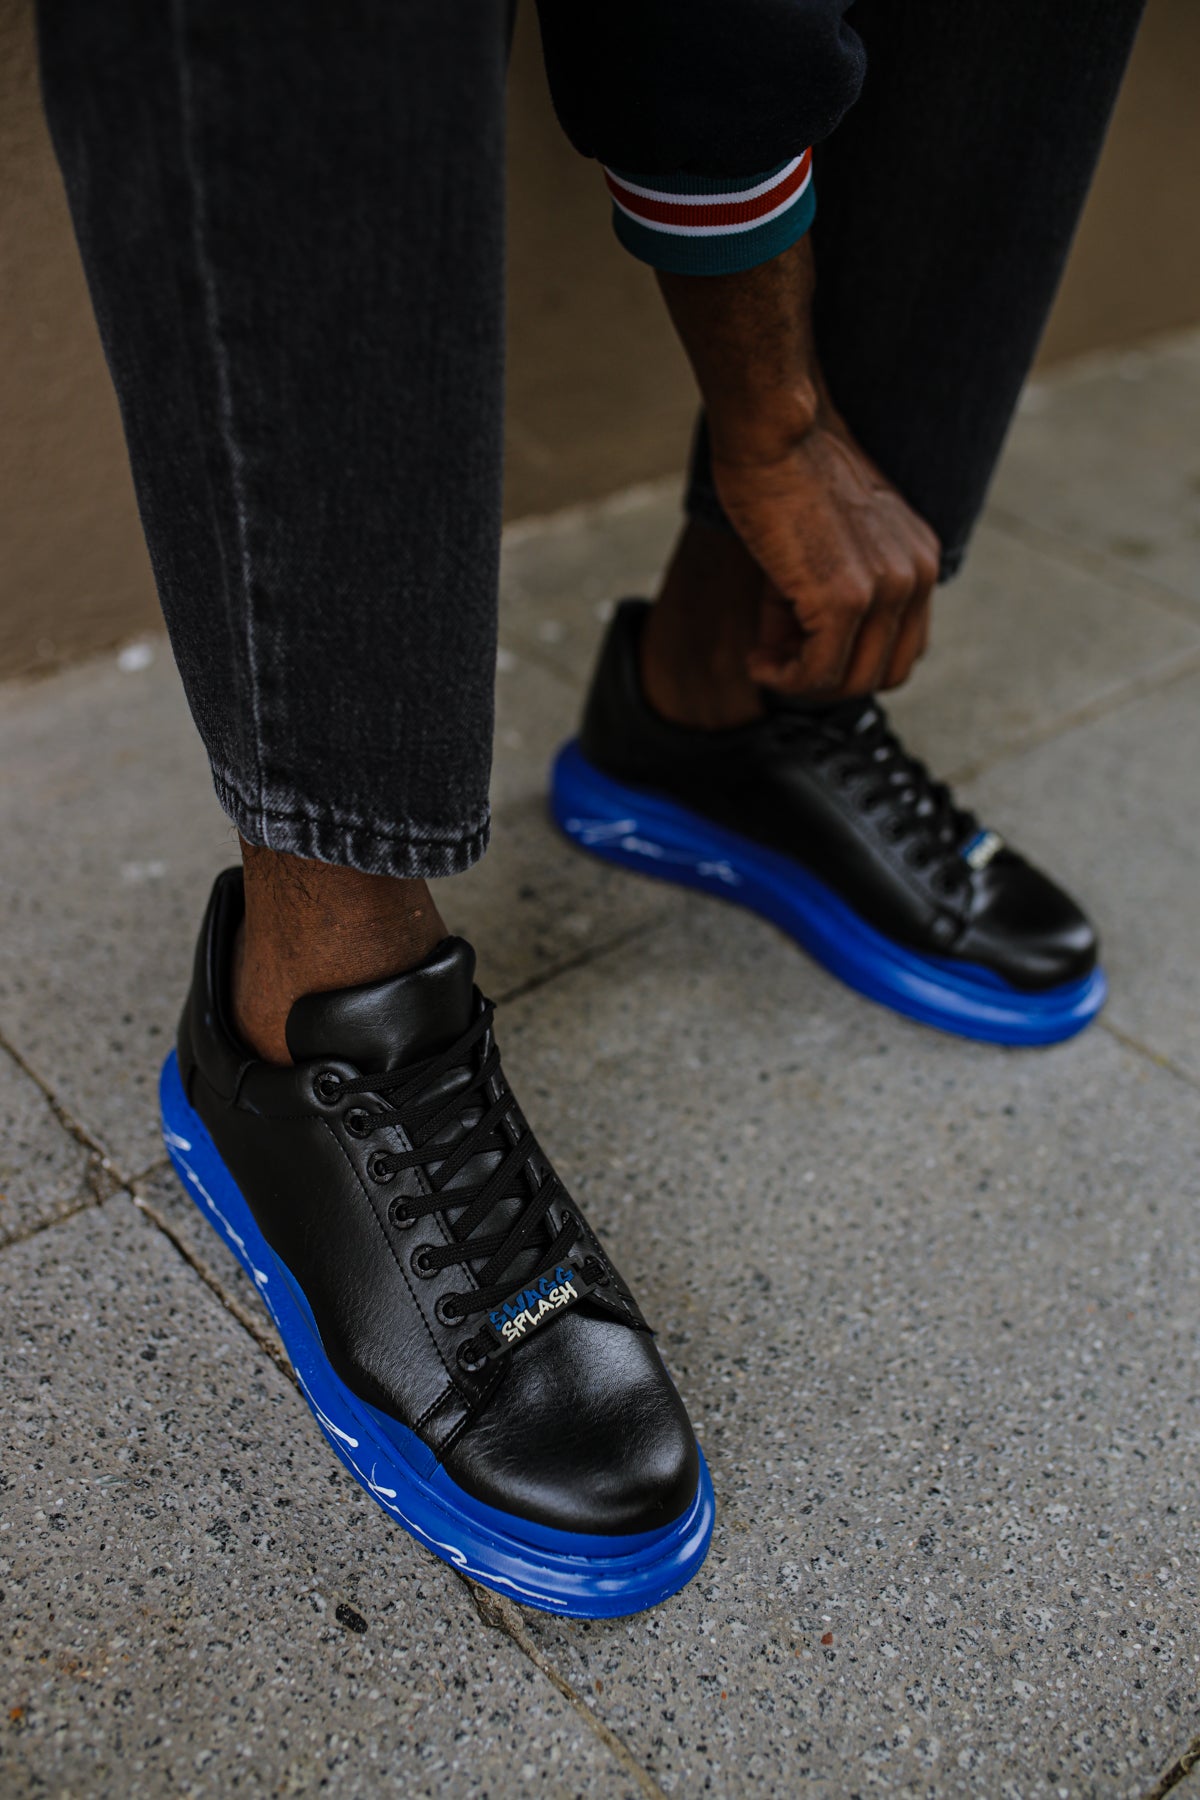 Rogue Navy Blue - Swagg Splash Sneakers